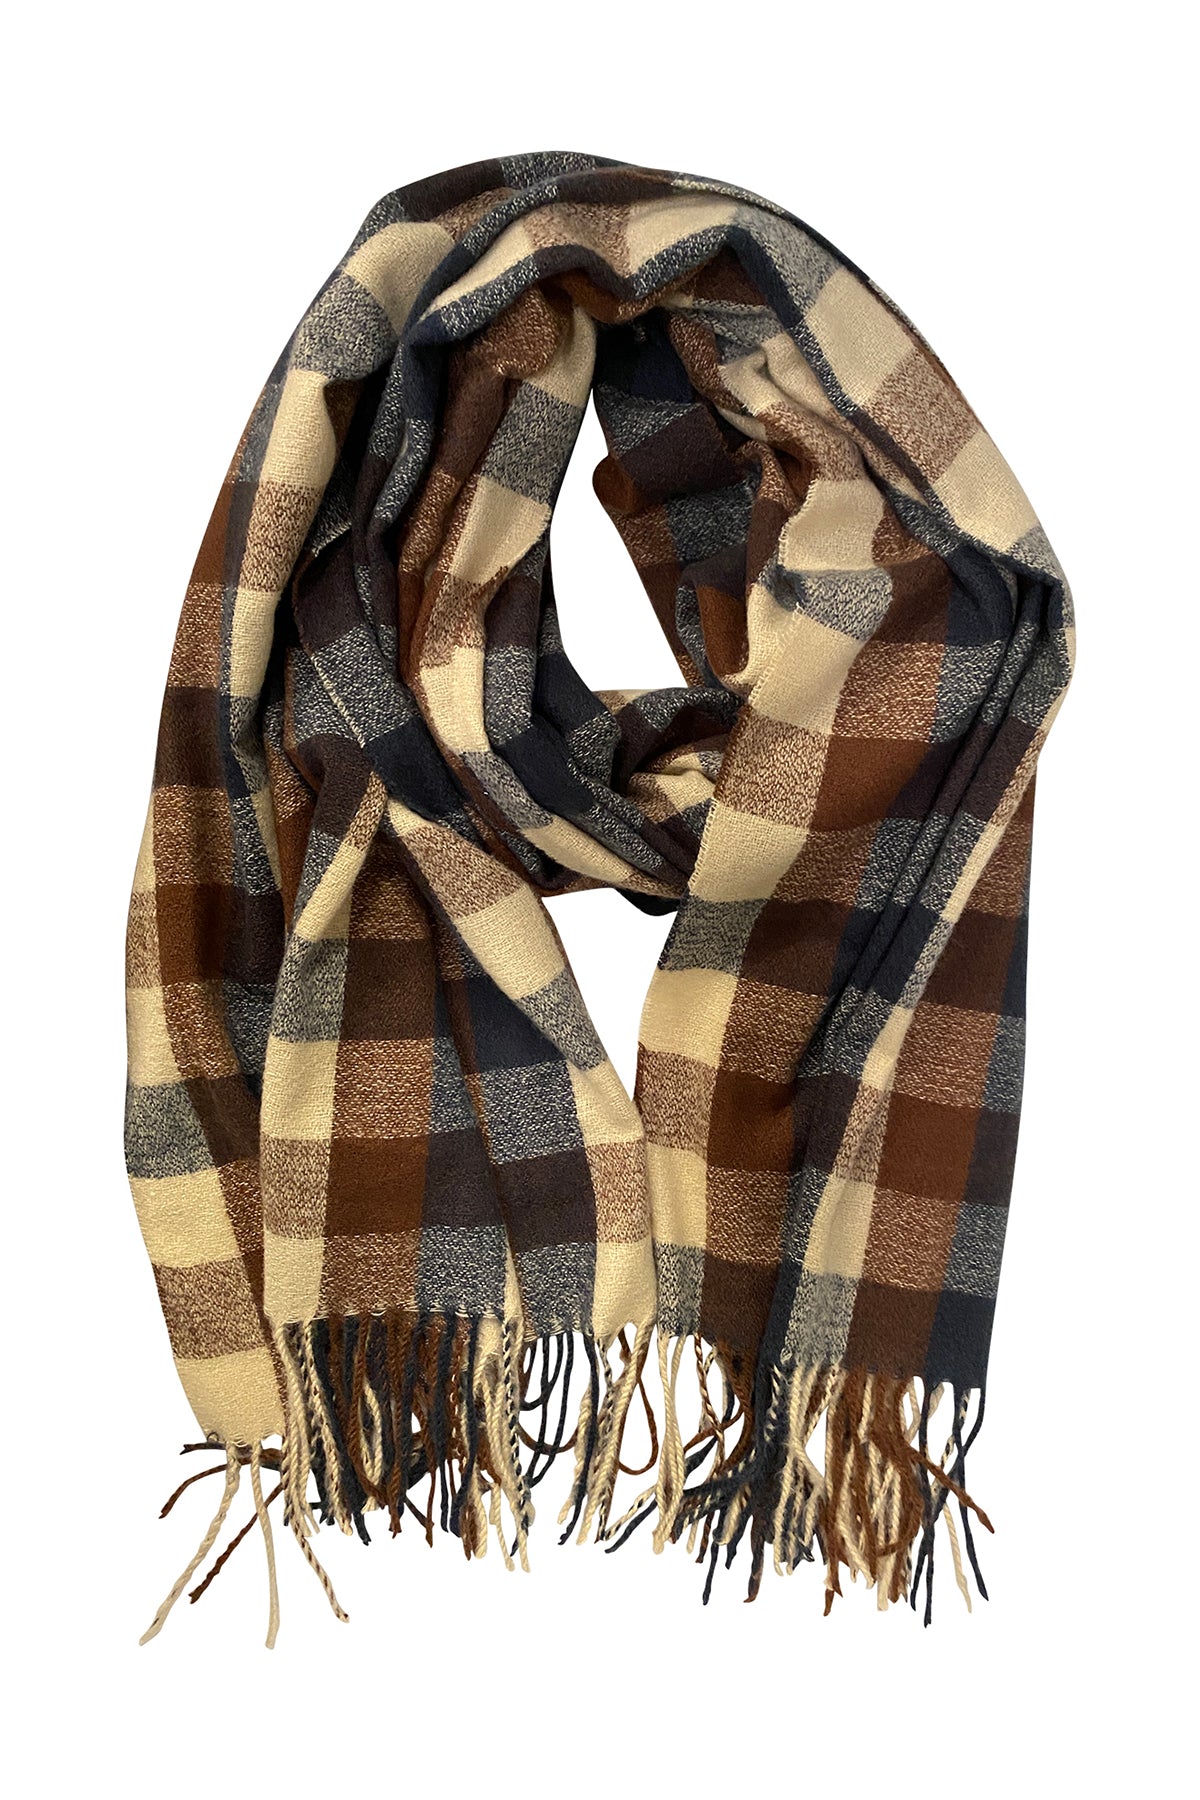 Buffalo Check Scarf in Navy, Brown, and Cream-25205526036673